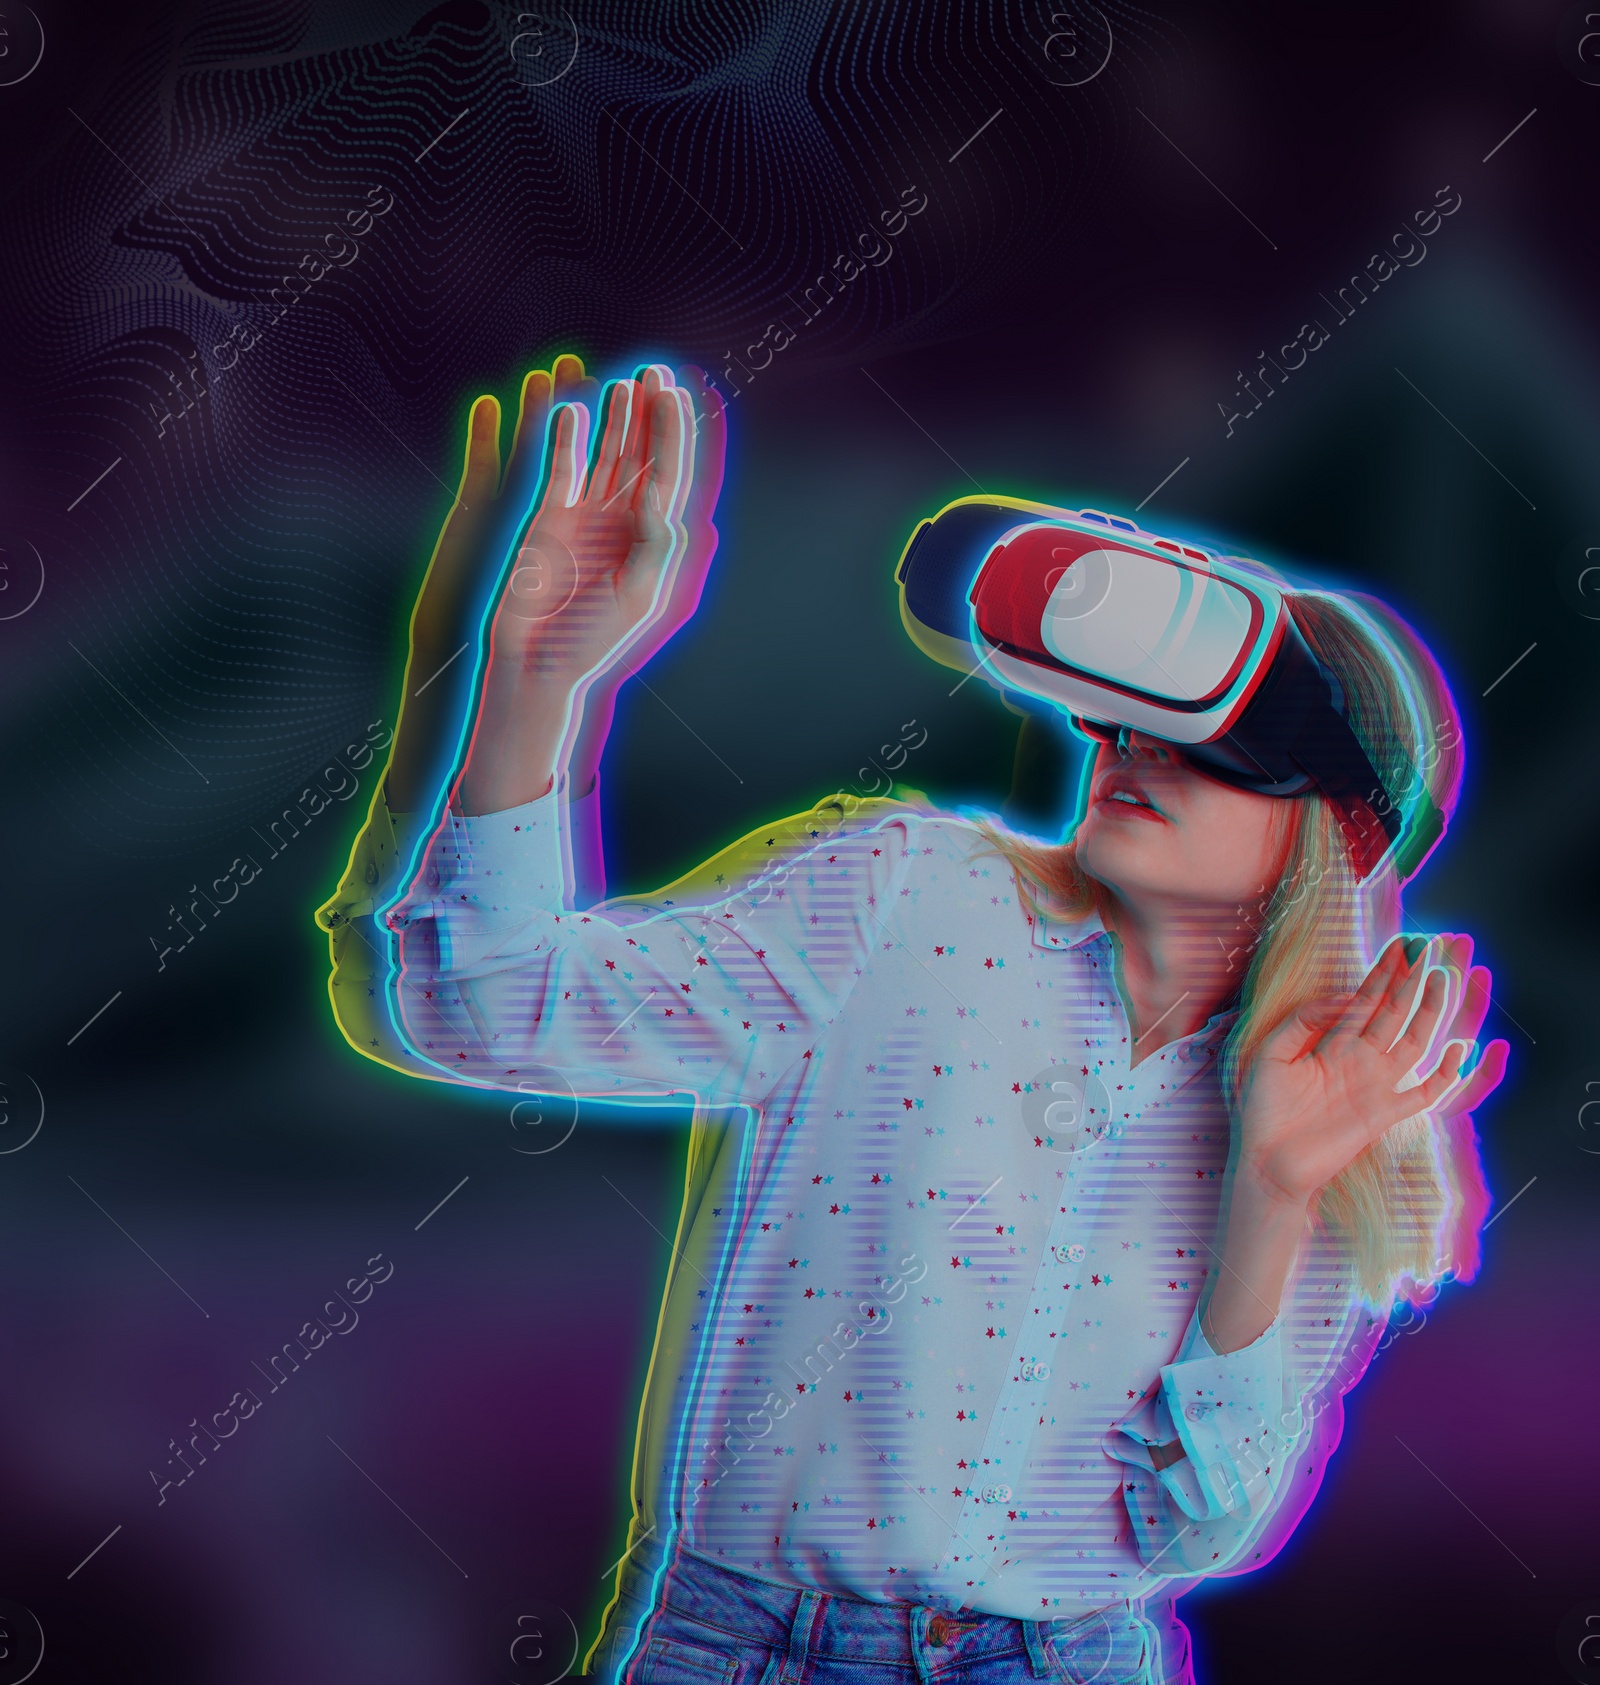 Image of Metaverse. Woman using virtual reality headset, glitch effect. Illustration of immersion into cyber space